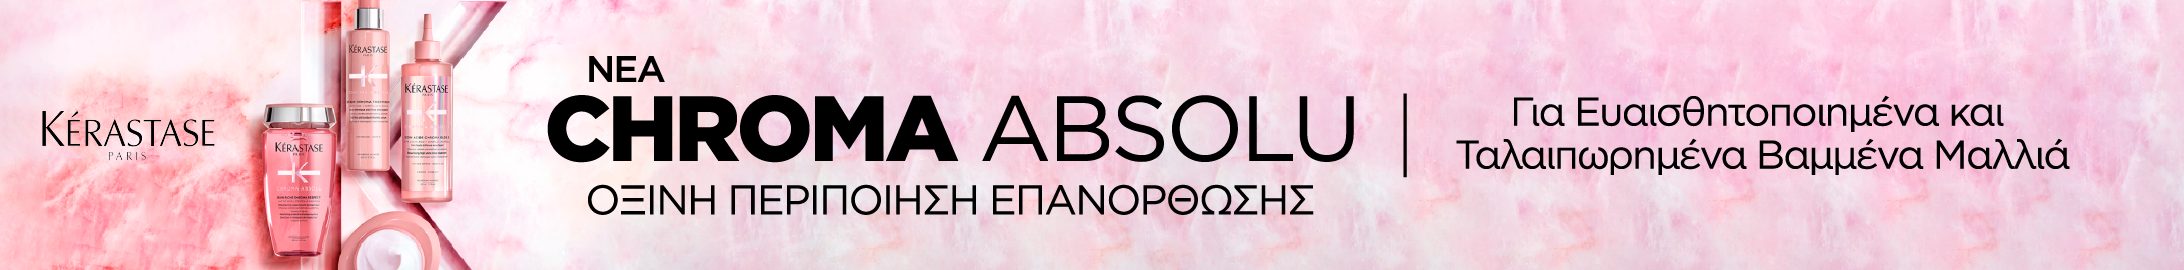 chroma absolu banner series page